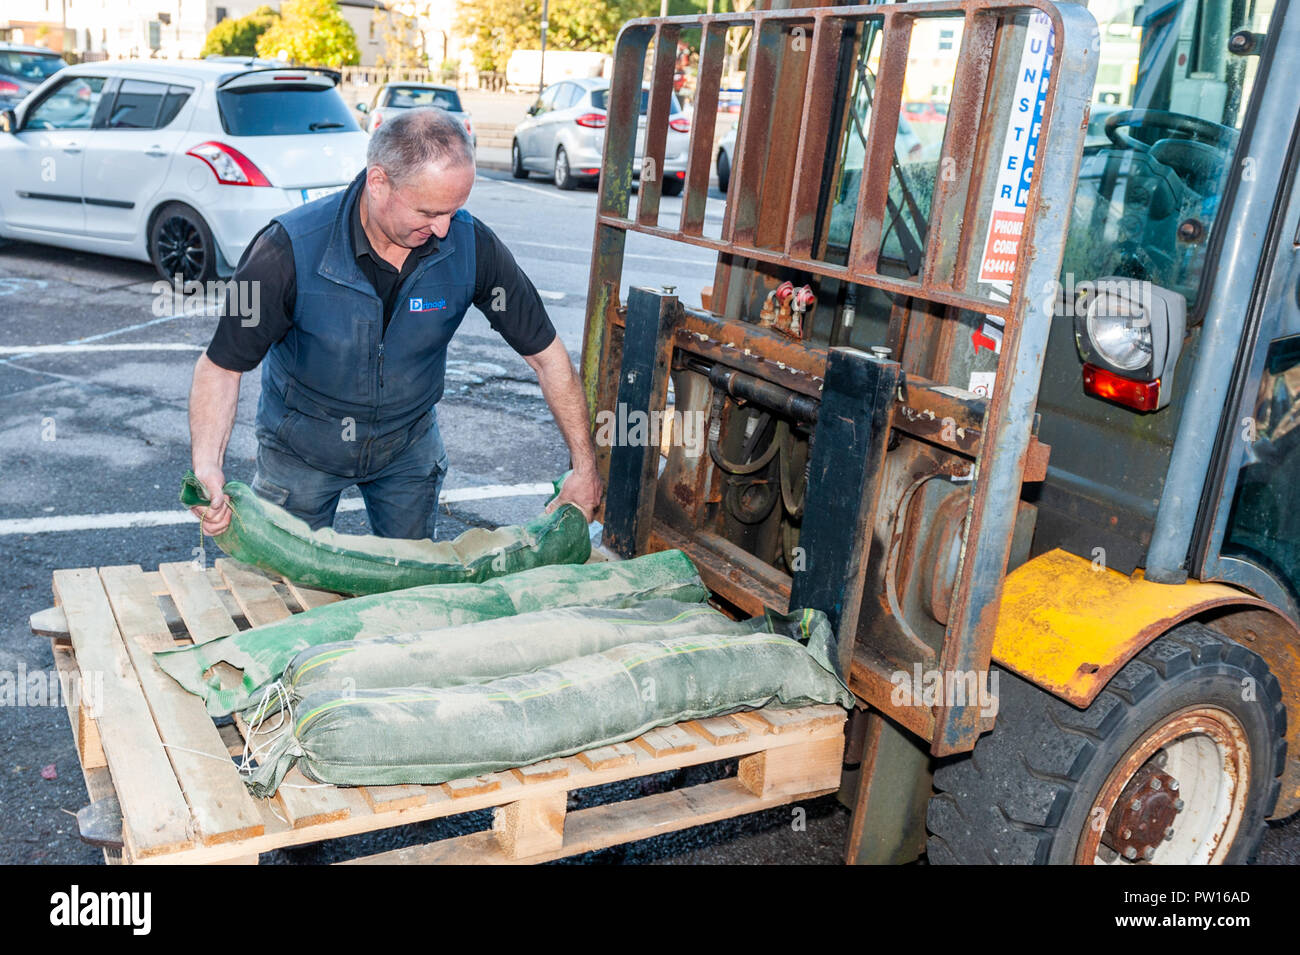 Bantry, West Cork, Ireland. 11th Oct, 2018. A member of Drinagh Hardware Store staff places sandbags outside the Drinagh store in preparation for the predicted Storm Callum, which is due to hit Ireland this evening. Credit: Andy Gibson/Alamy Live News. Stock Photo